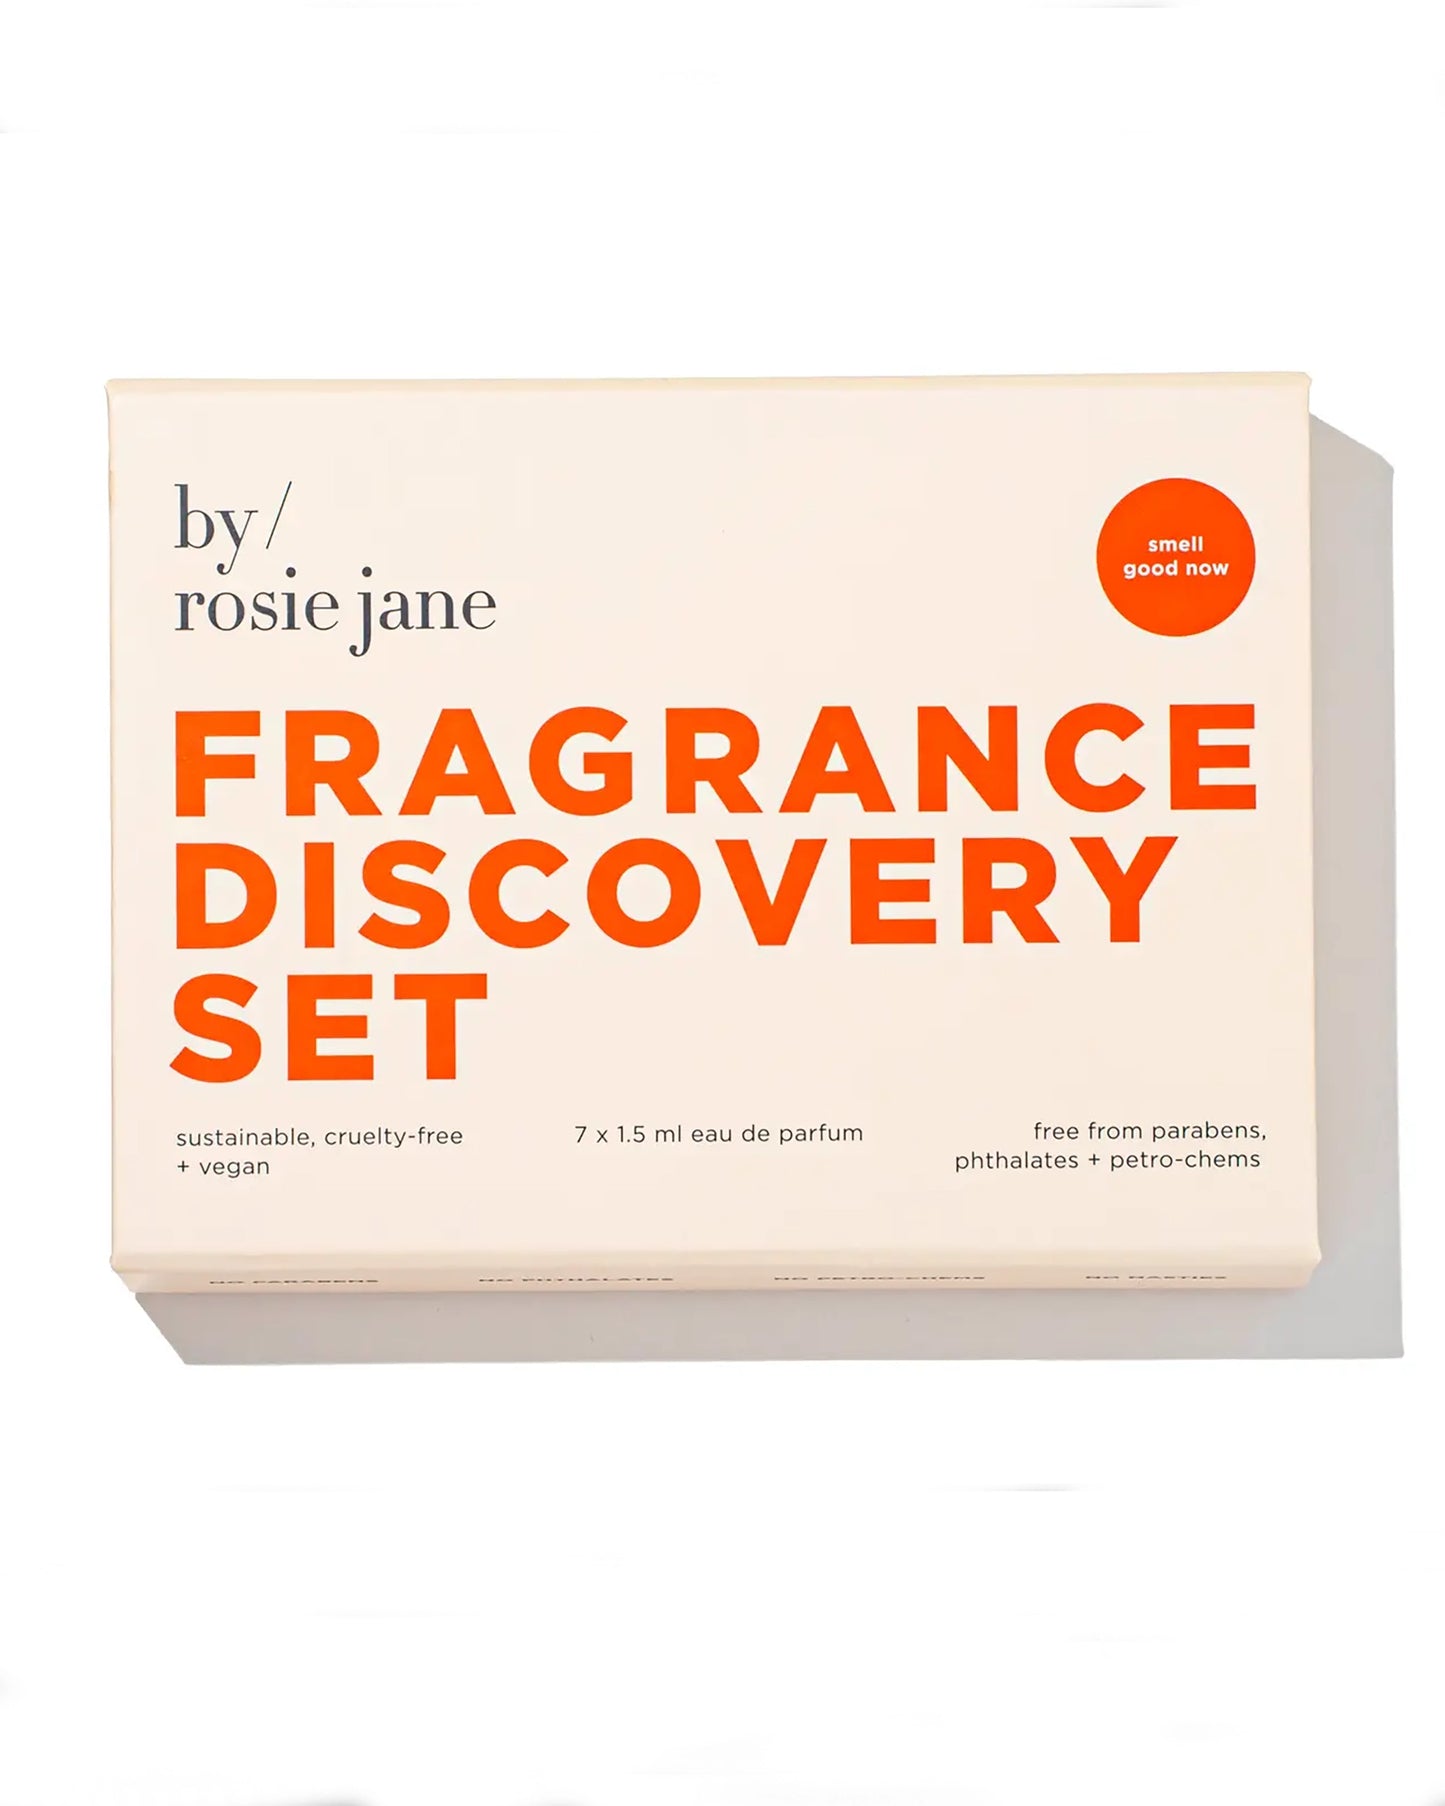 Fragrance Discovery Set by Rosie Jane